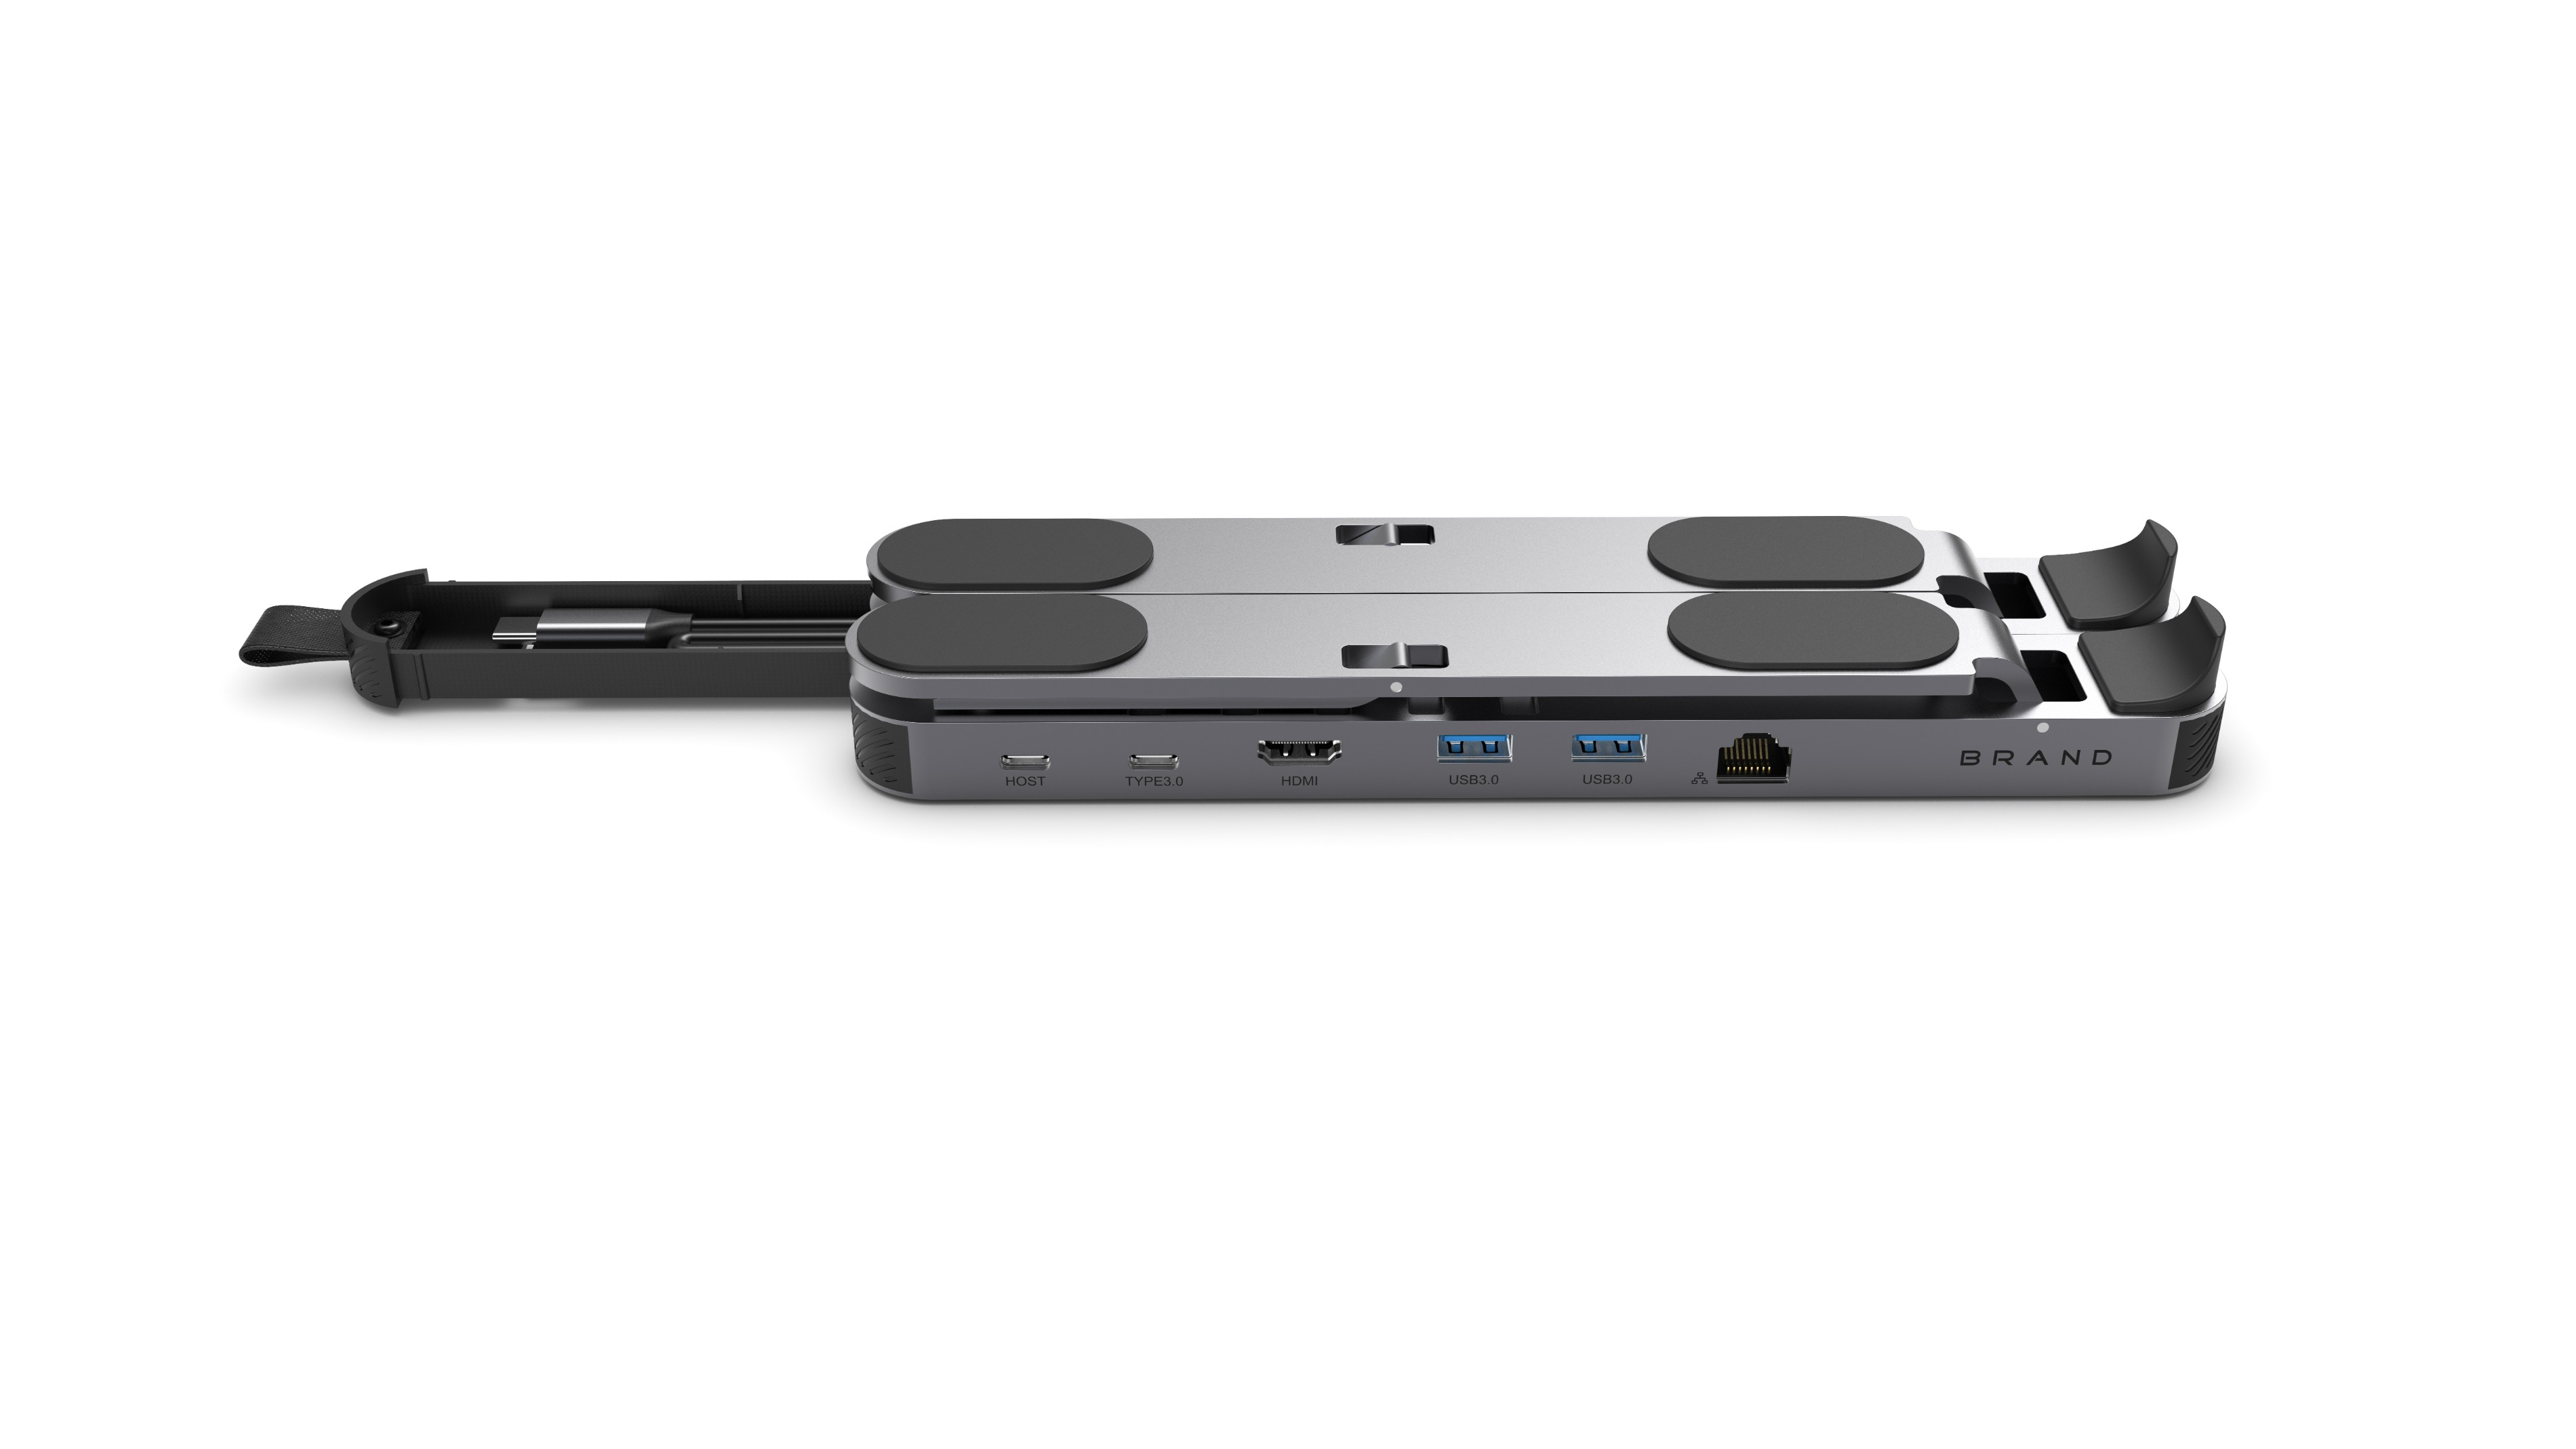 Laptop stand with 6-in-1 USB hub